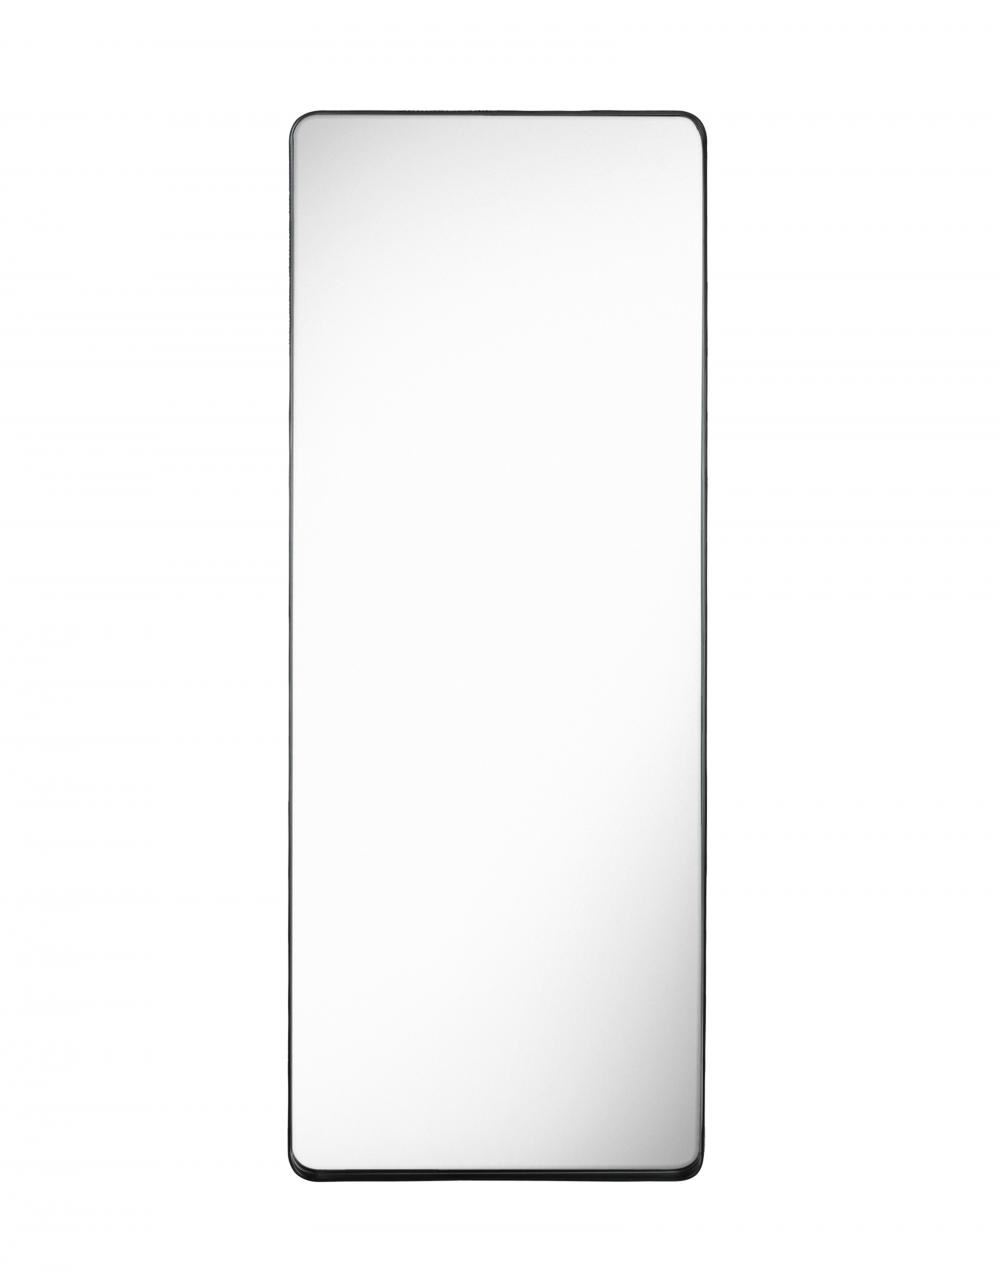 Adnet Rectangulaire Wall Mirror Large Black